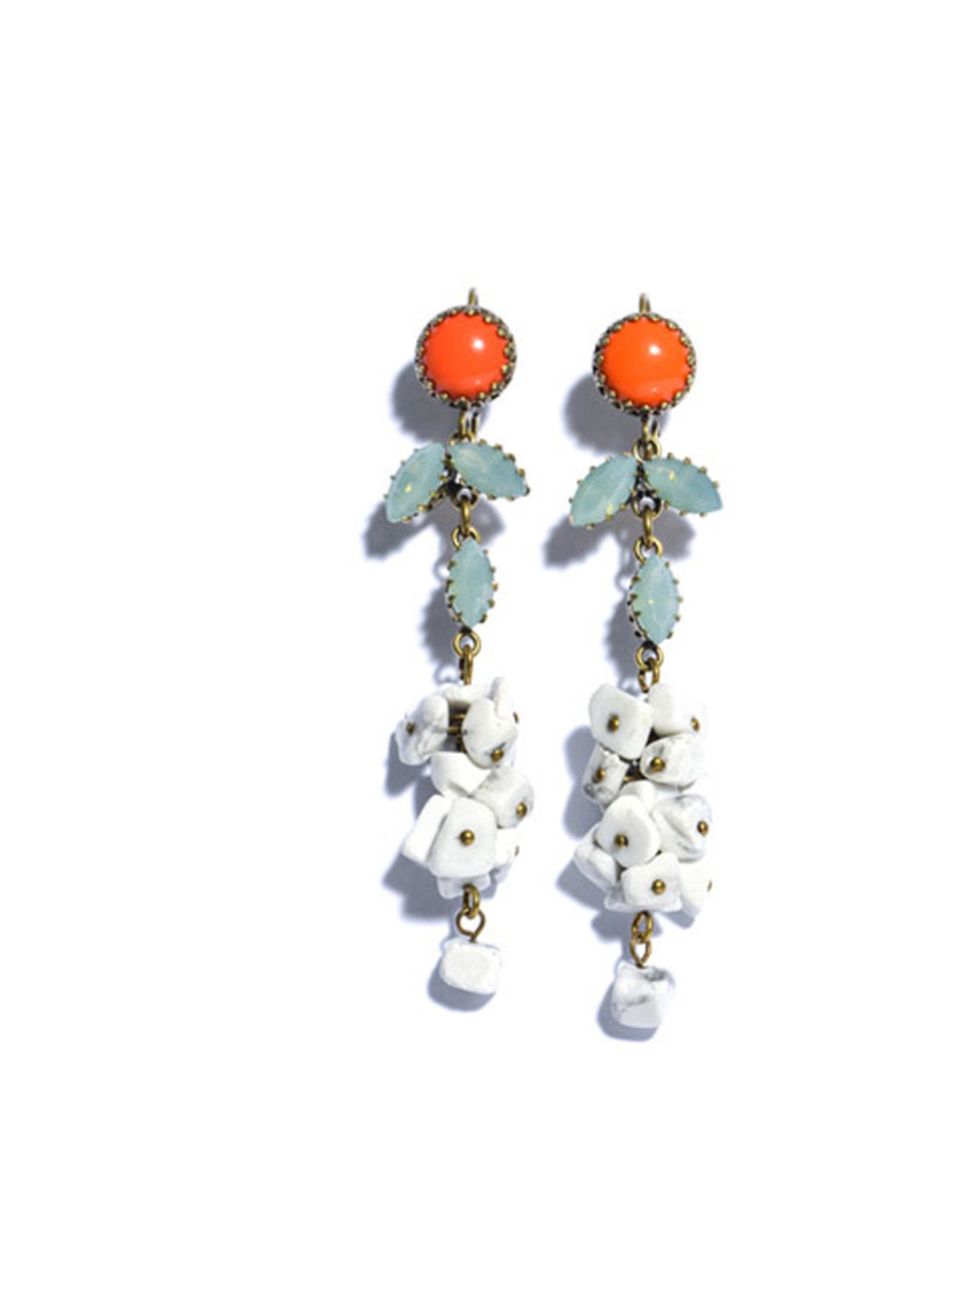 <p>With a roll neck cashmere jumper or floaty summer dress, these Isabel Marant earrings will always had a chic touch... Isabel Marant Hiro Idole earrings, £175, at Matches</p><p><a href="http://shopping.elleuk.com/browse?fts=isabel+marant+hiro+idole+earr